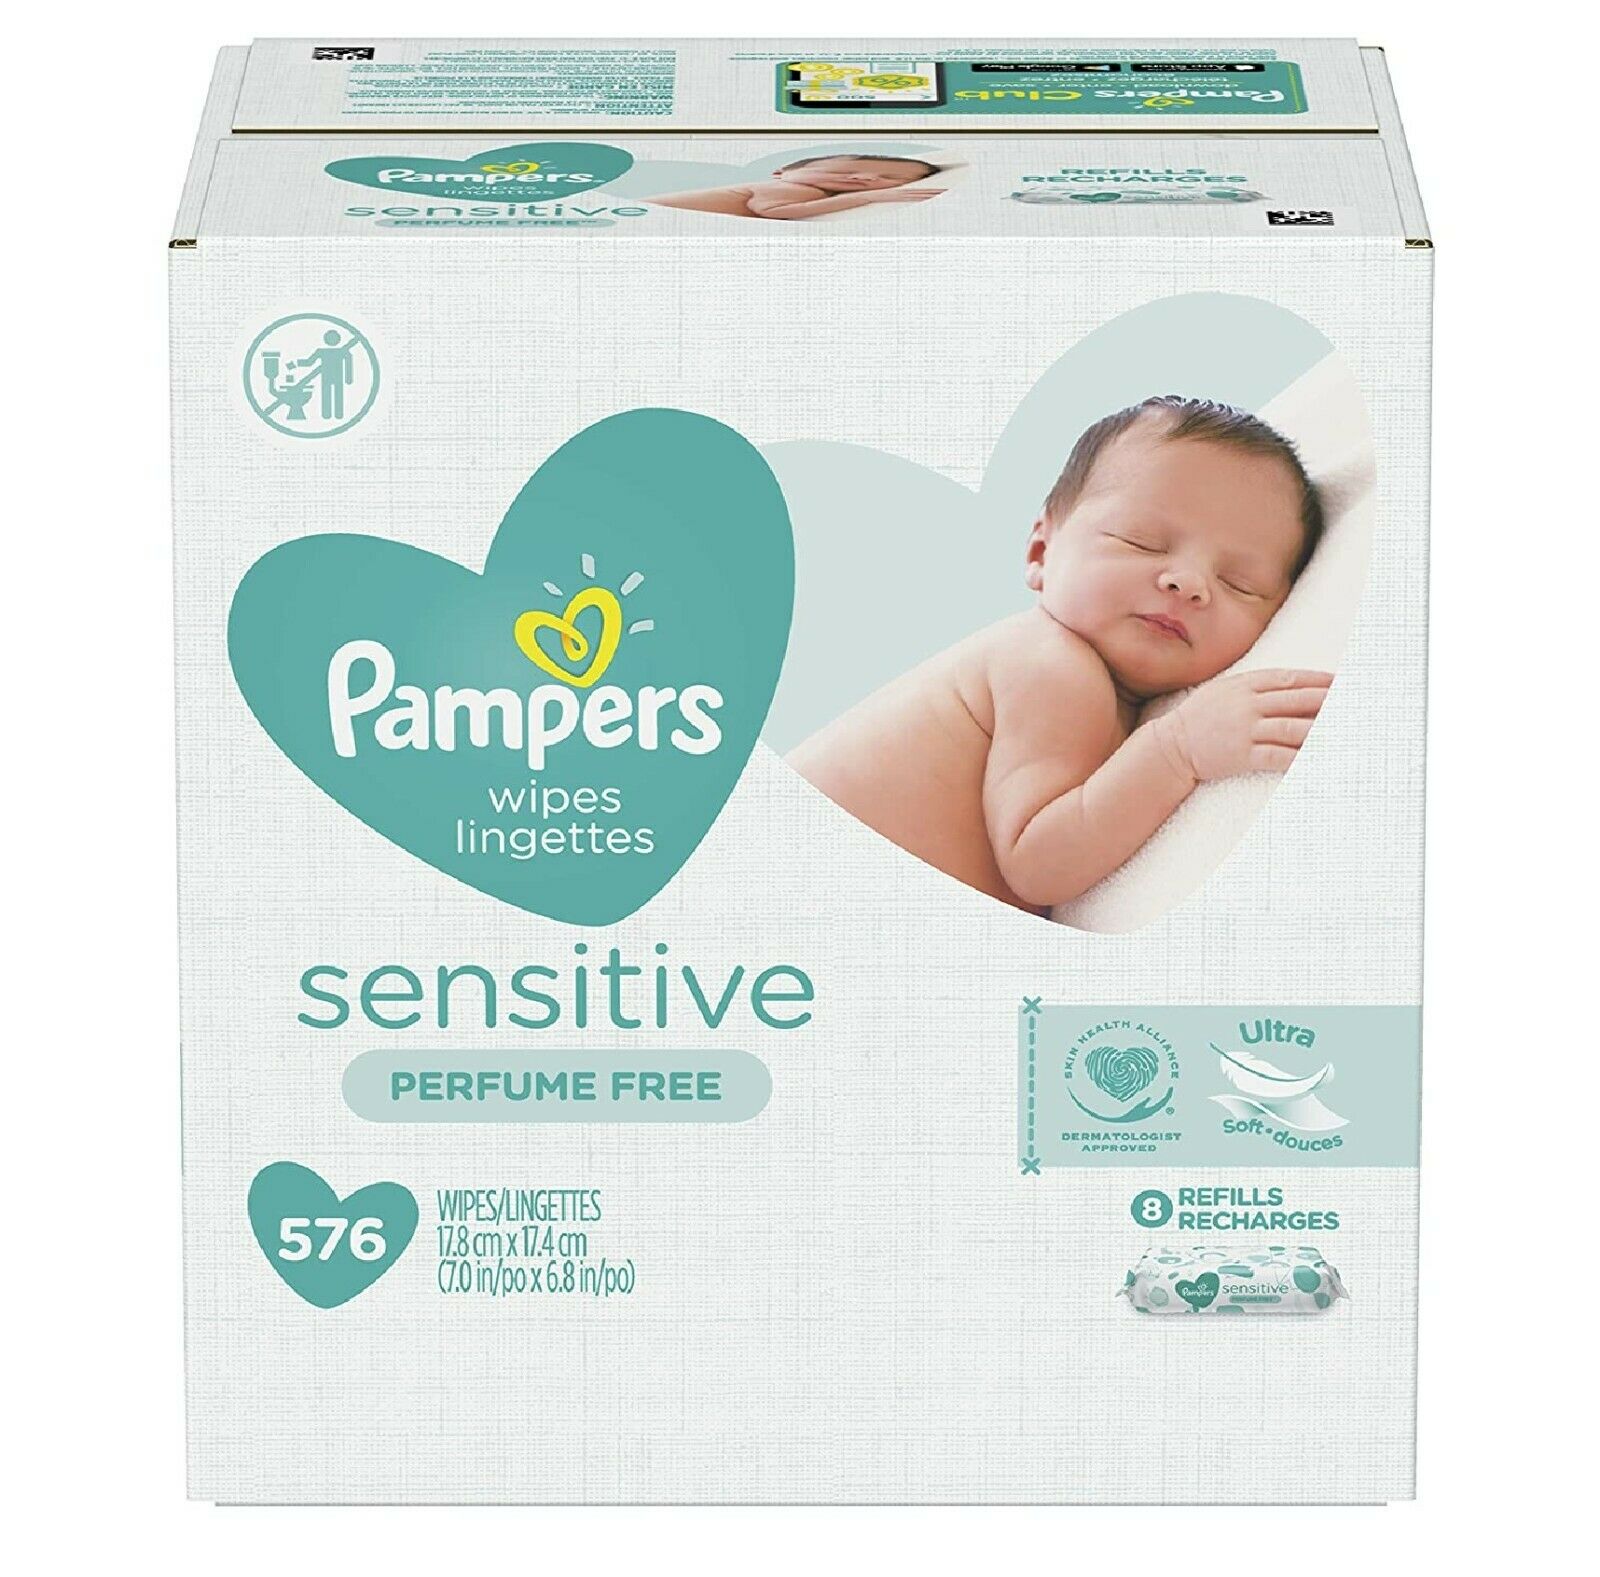 Pampers Sensitive Water Based Baby Wipes Hypoallergenic And Unscented, 576 Count